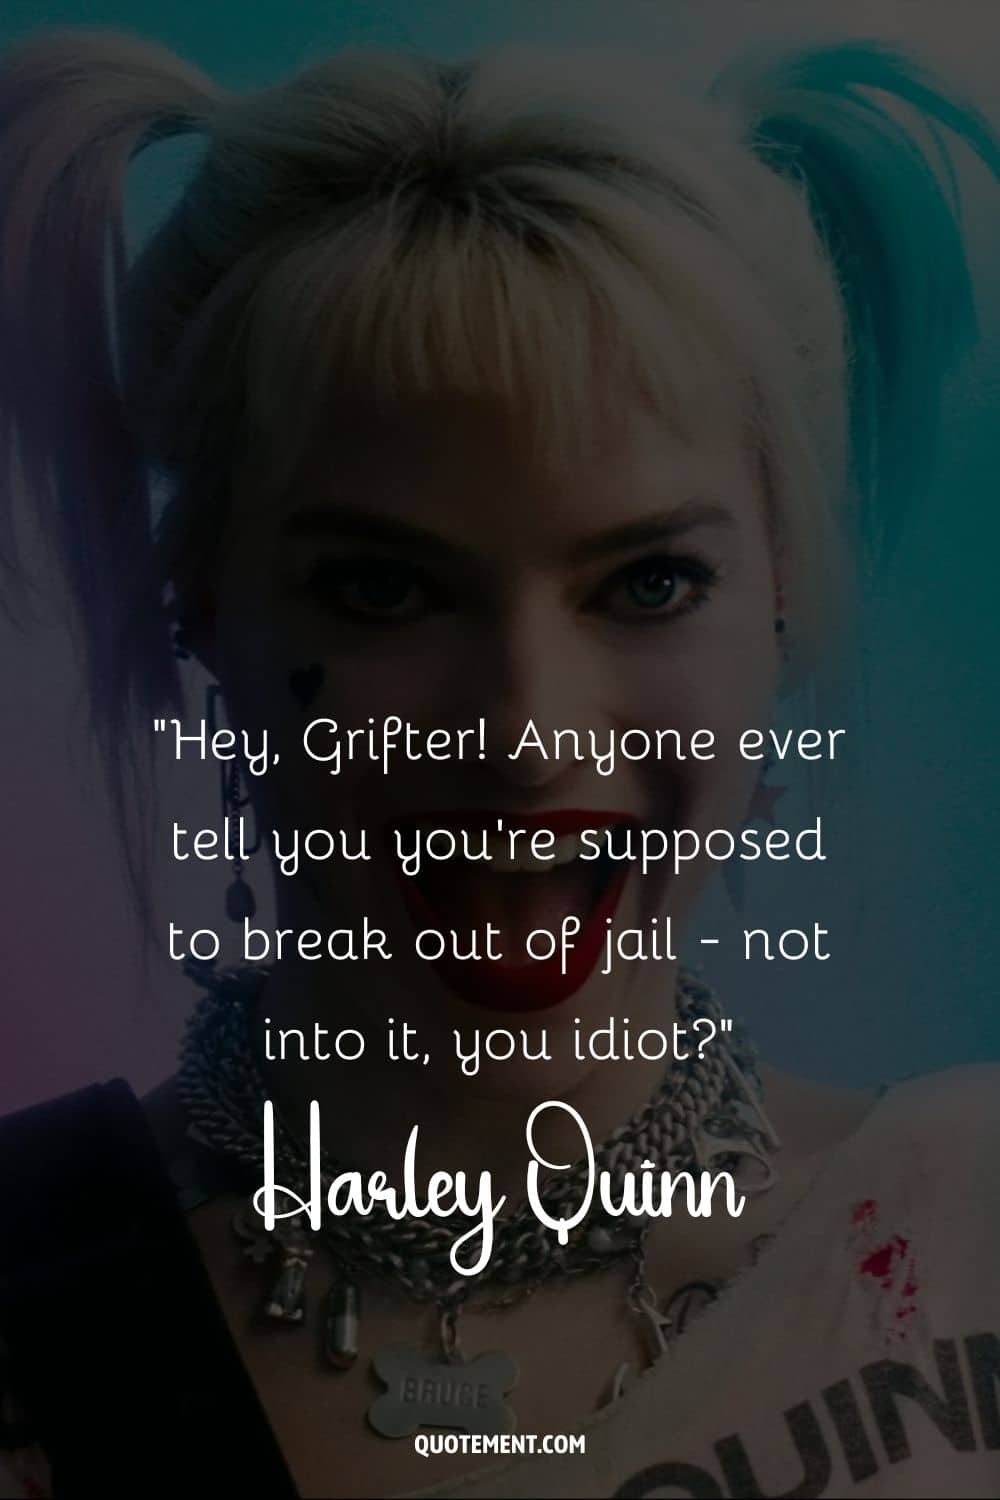 Harley Quinn's quirky charm is pure comic brilliance.